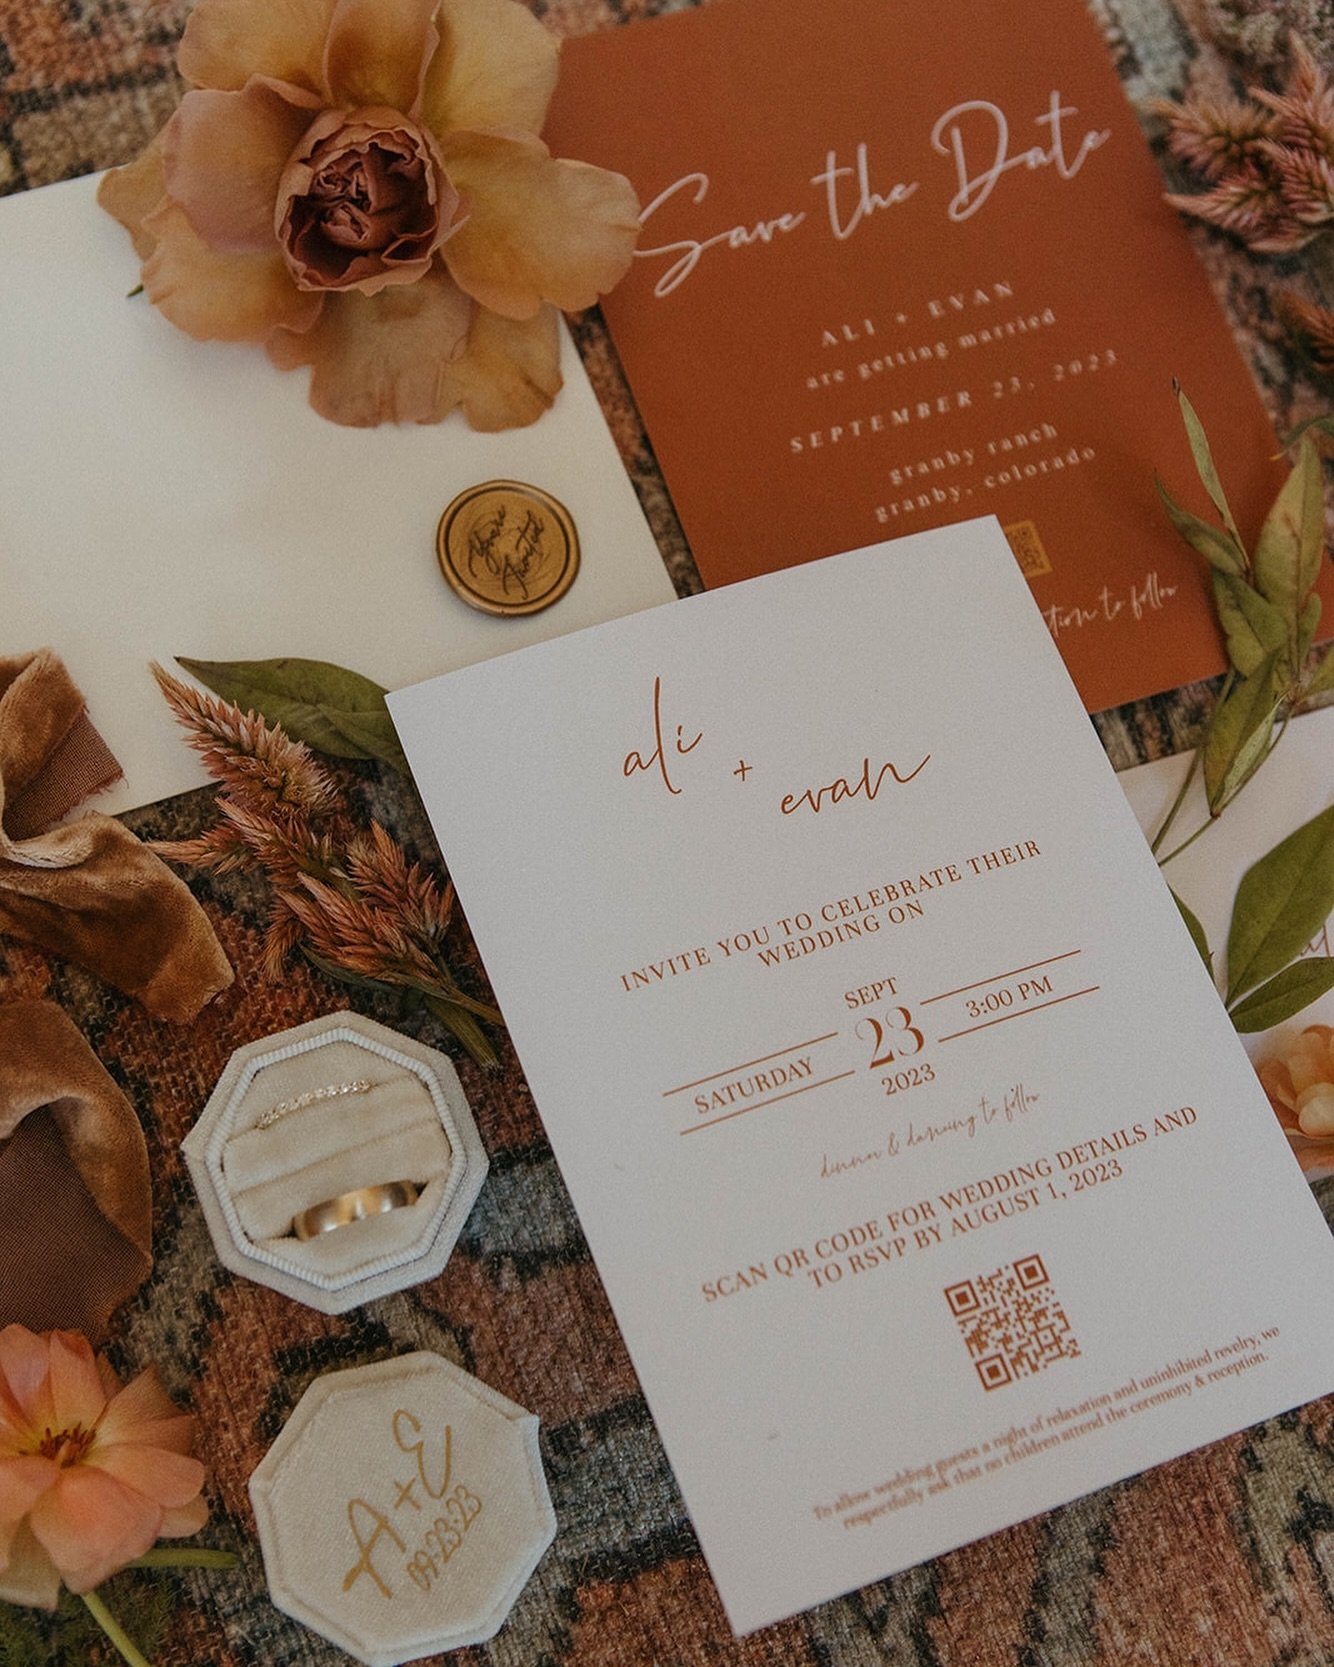 Paper goods customized by our bride! QR codes have become super popular on invites and save the dates giving guests the easiest ways possible to access the wedding website and RSVP.